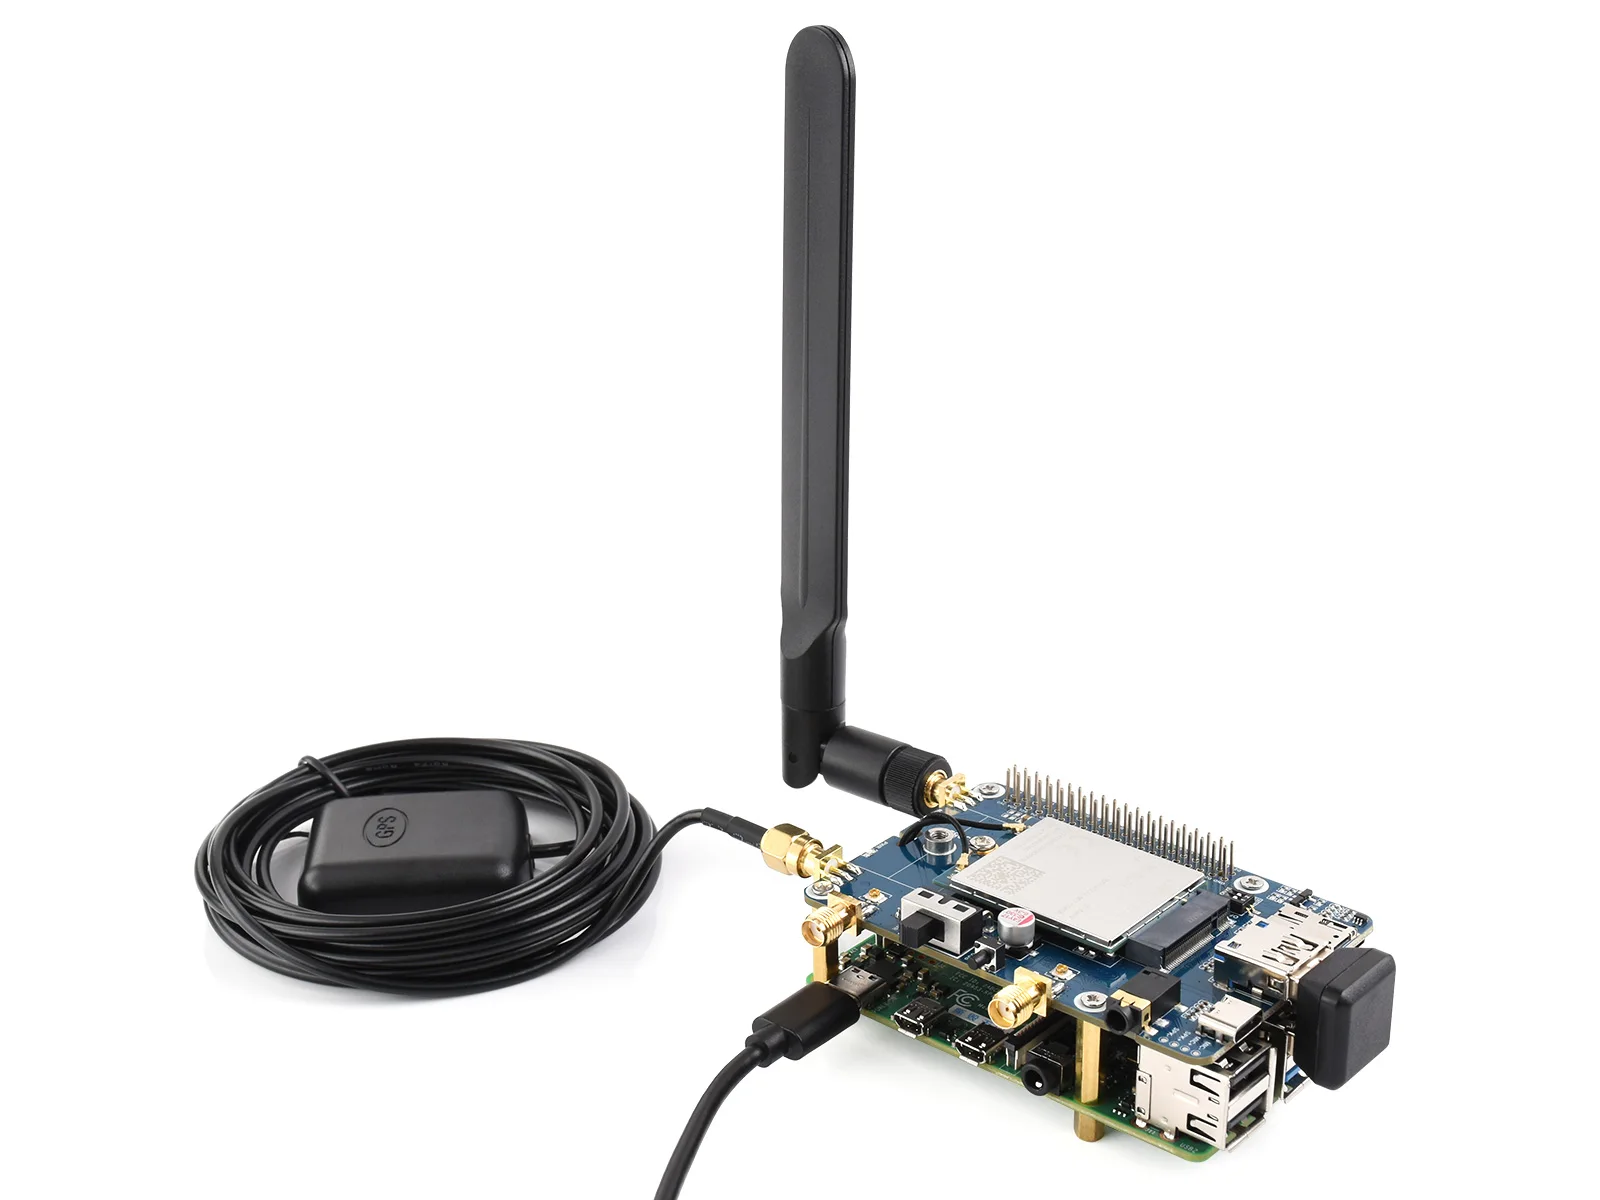 Waveshare Raspberry Pi LTE Cat 6 Communication HAT, LTE-A Global Multi-band, GNSS Positioning, Comes With EM060K-GL Module